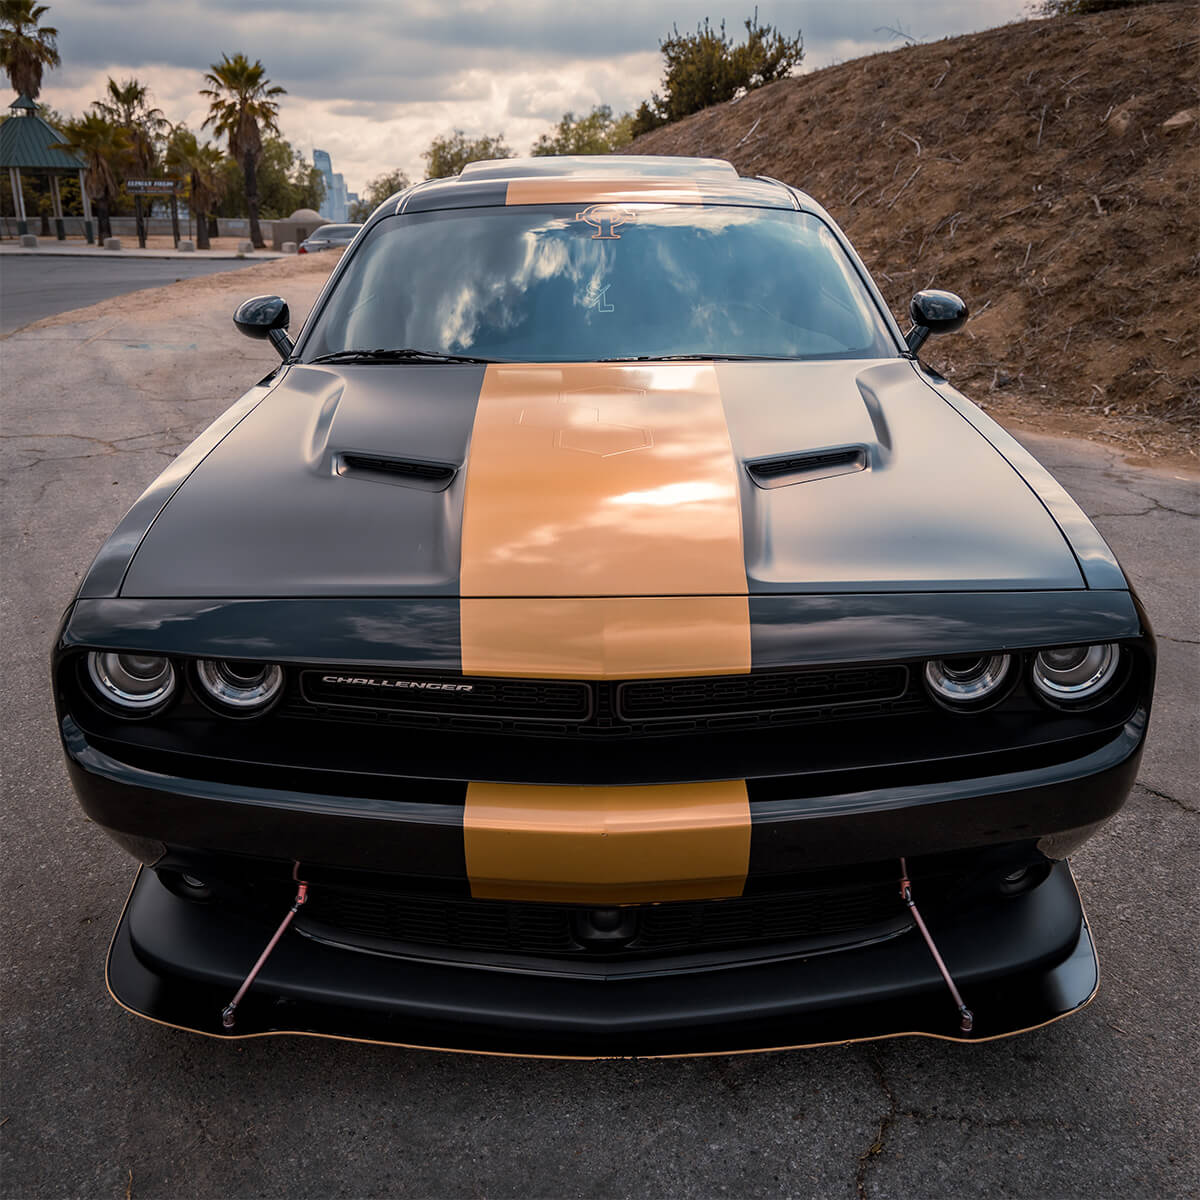 Dodge Challenger R/T with splitter extension and splitter rods